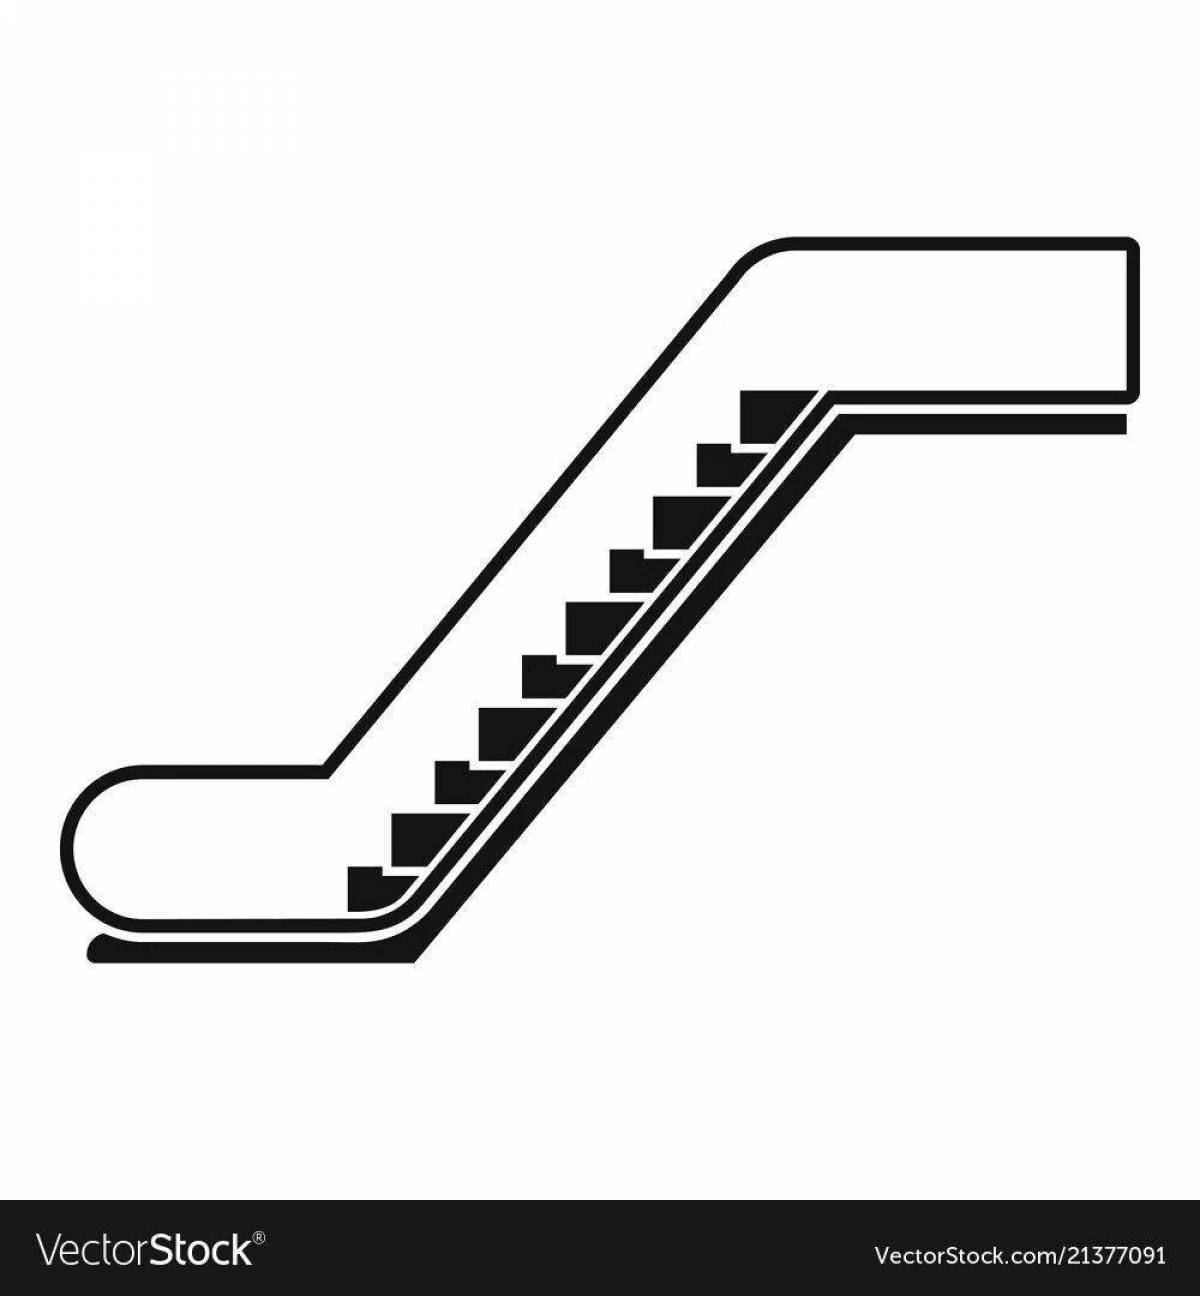 Coloring page cheerful escalator